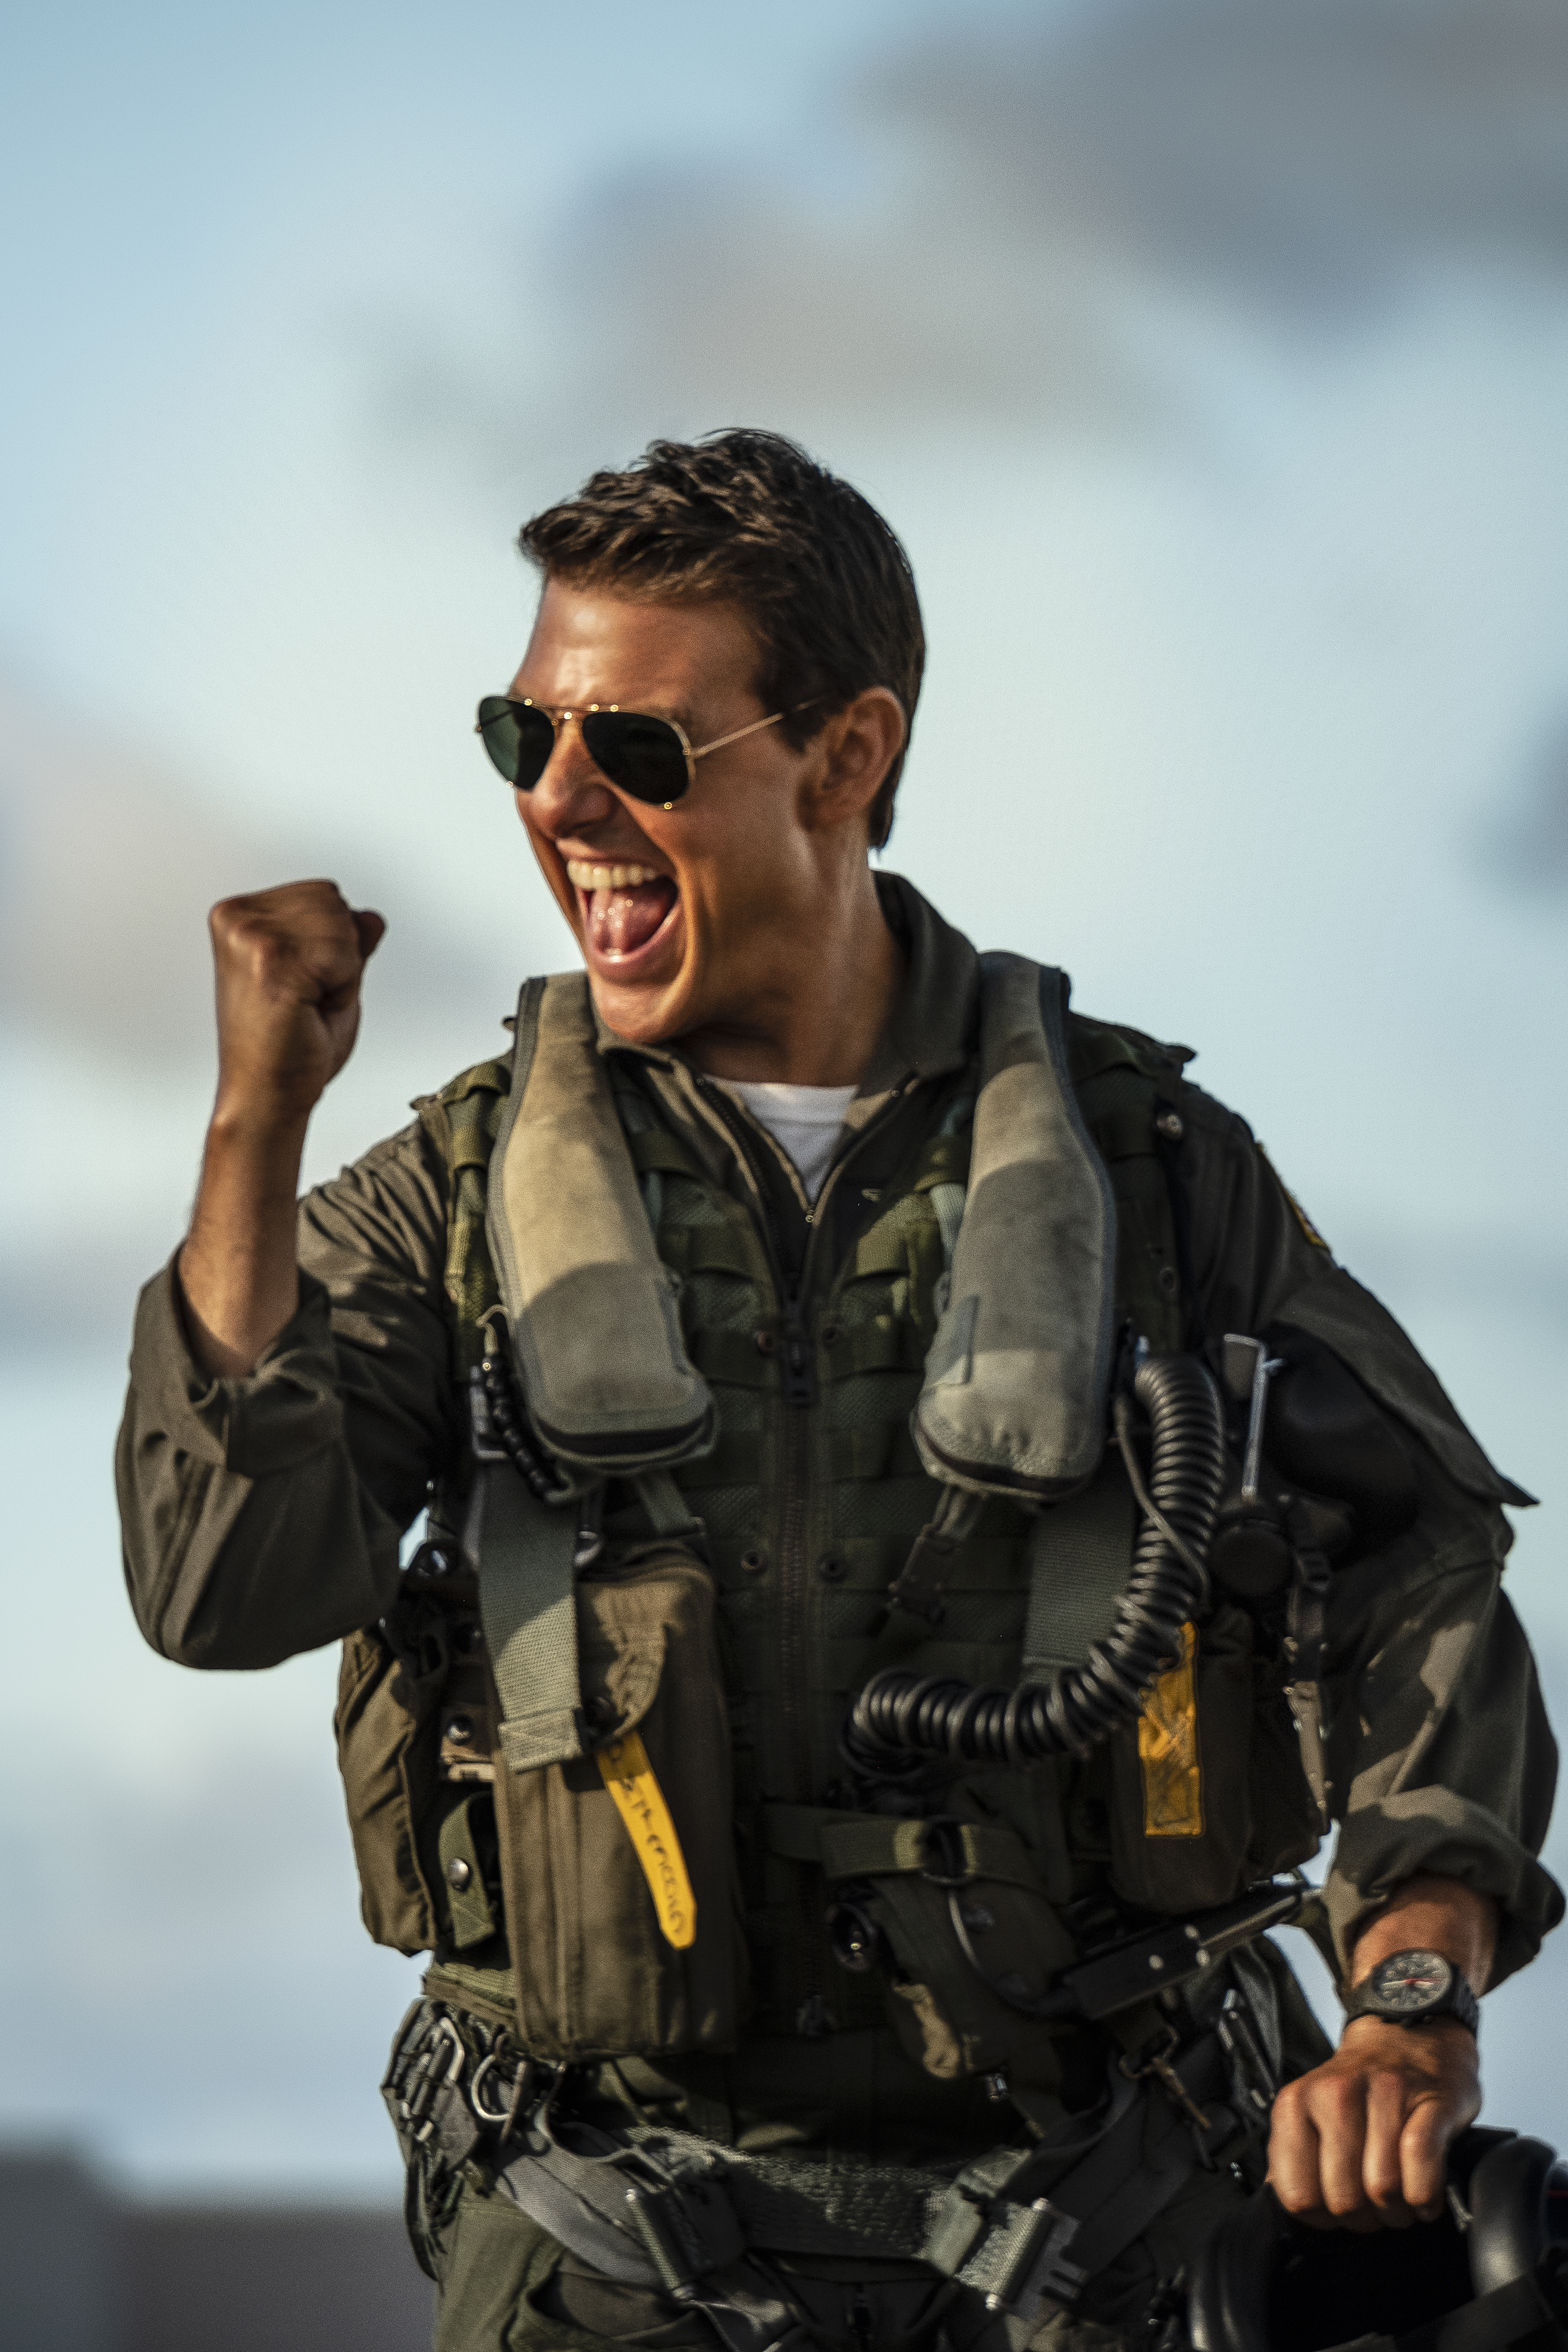 Tom Cruise reprises his role as Lieutenant Pete "Maverick" Mitchell in the second Top Gun movie.